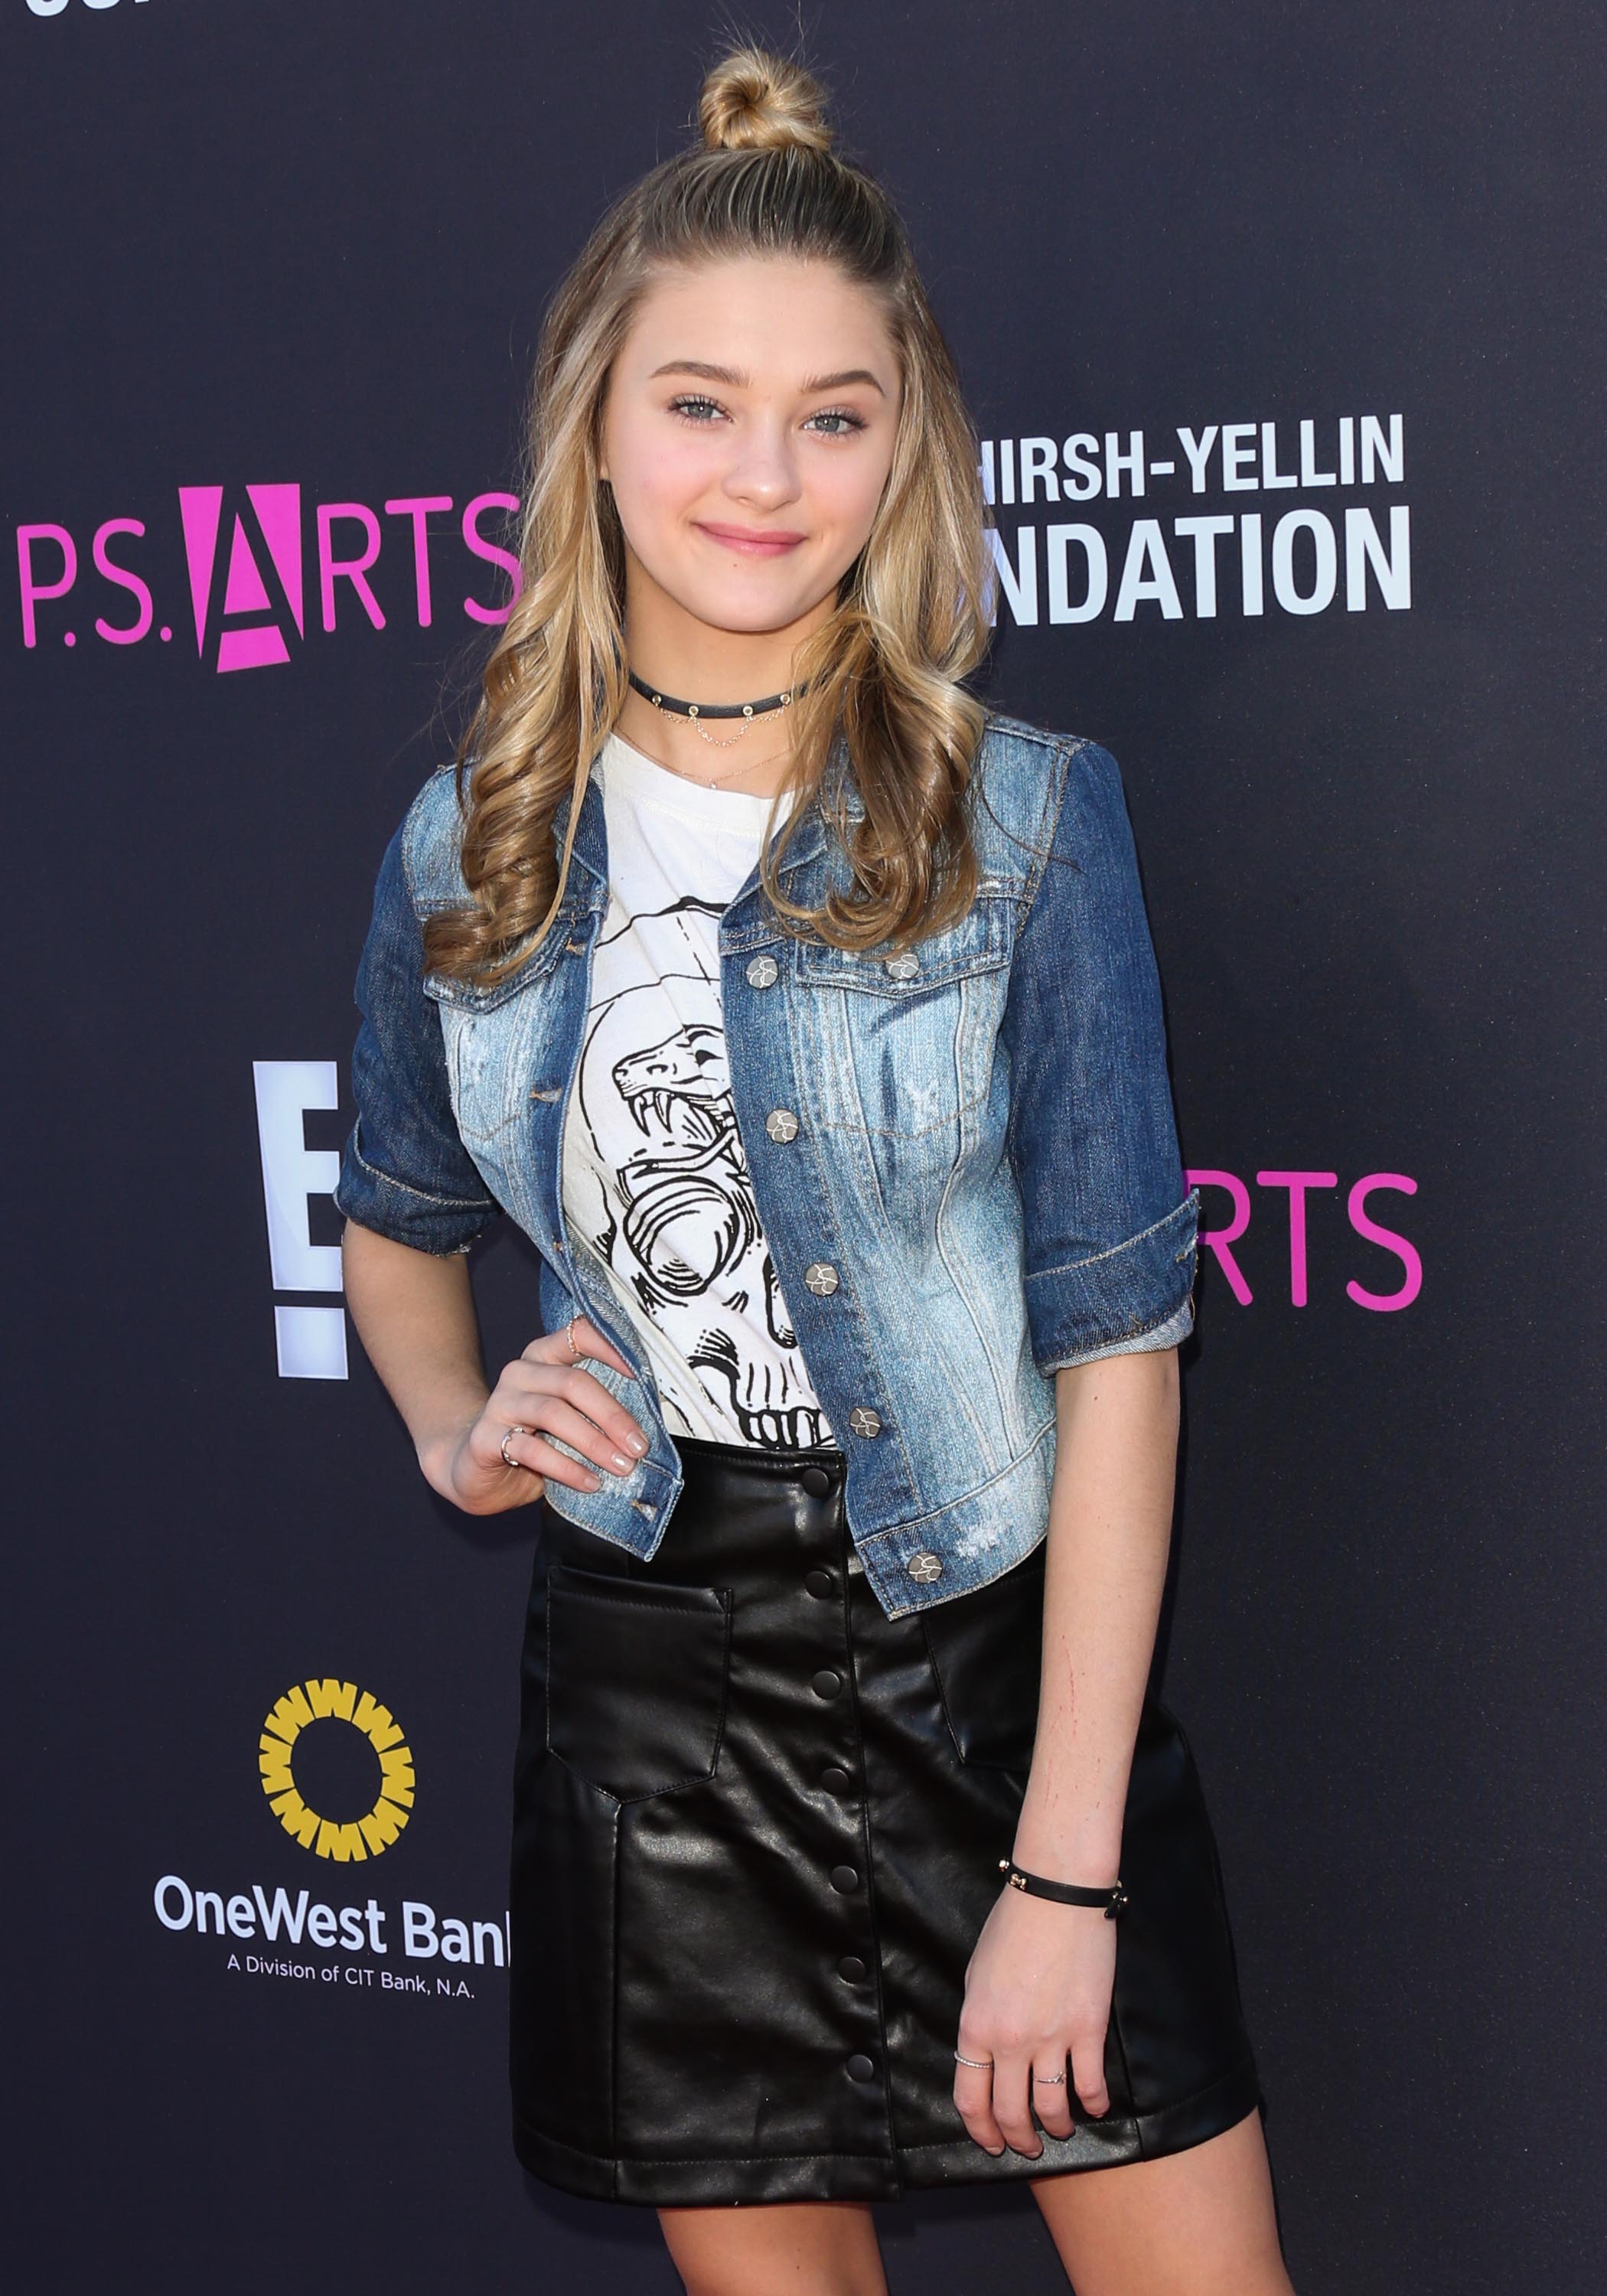 Lizzy Greene attends the P.S. ARTS Express Yourself